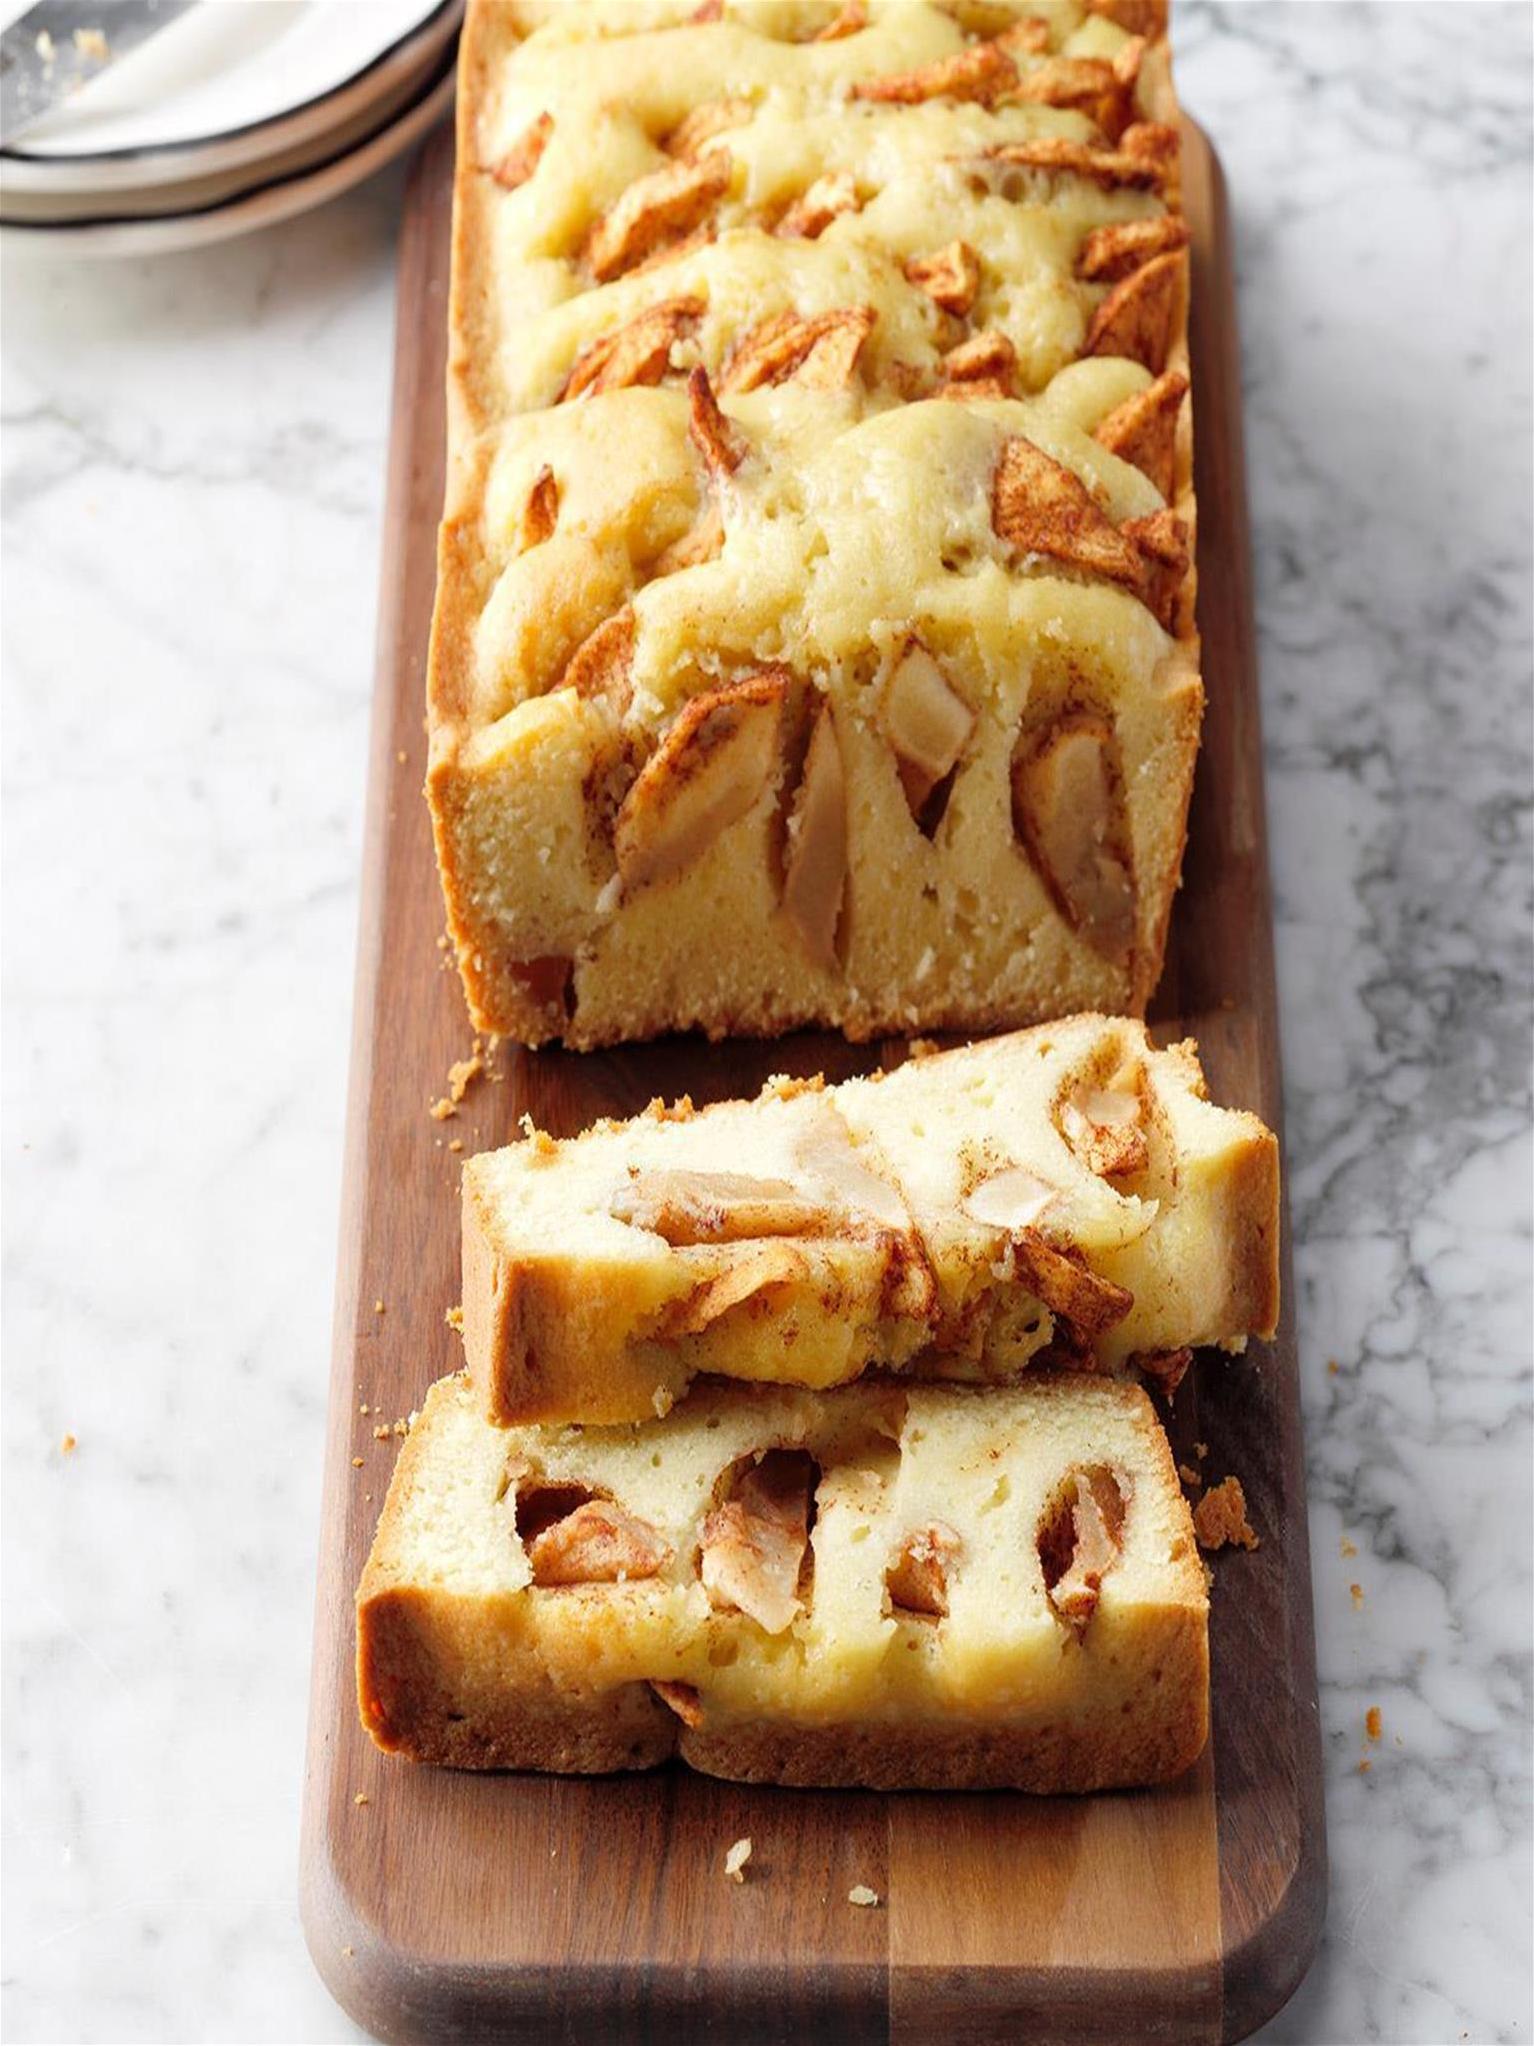  This Dutch apple cake is the answer to all your dessert cravings!